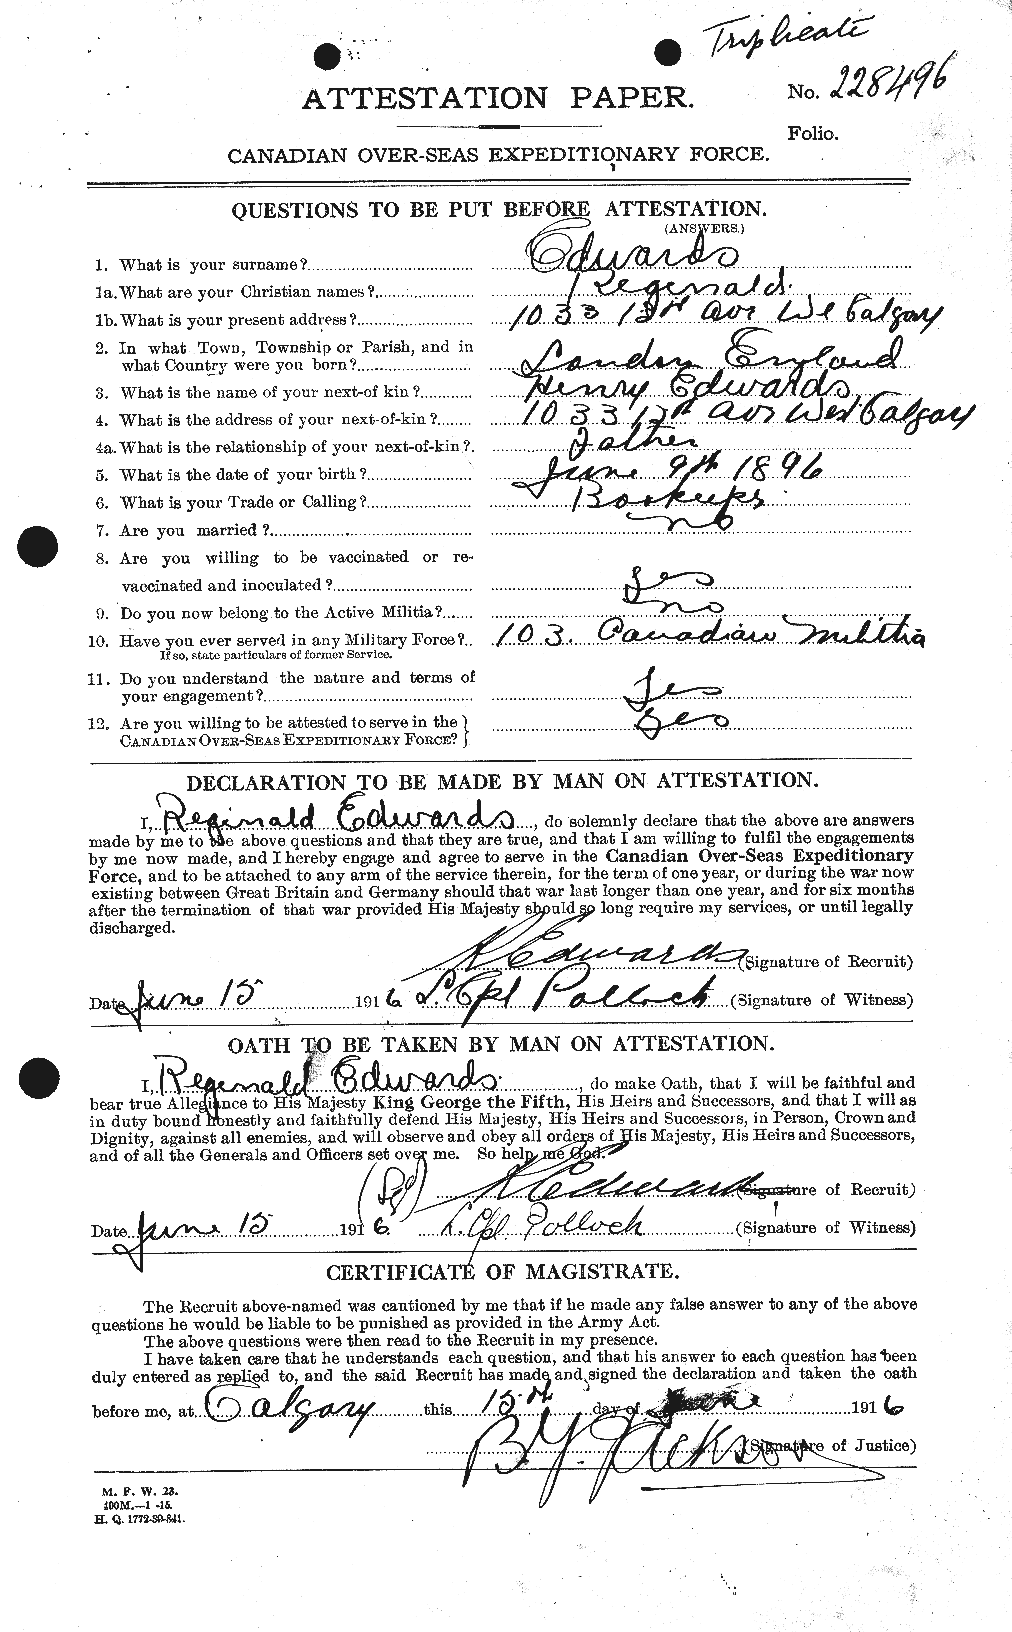 Personnel Records of the First World War - CEF 310246a